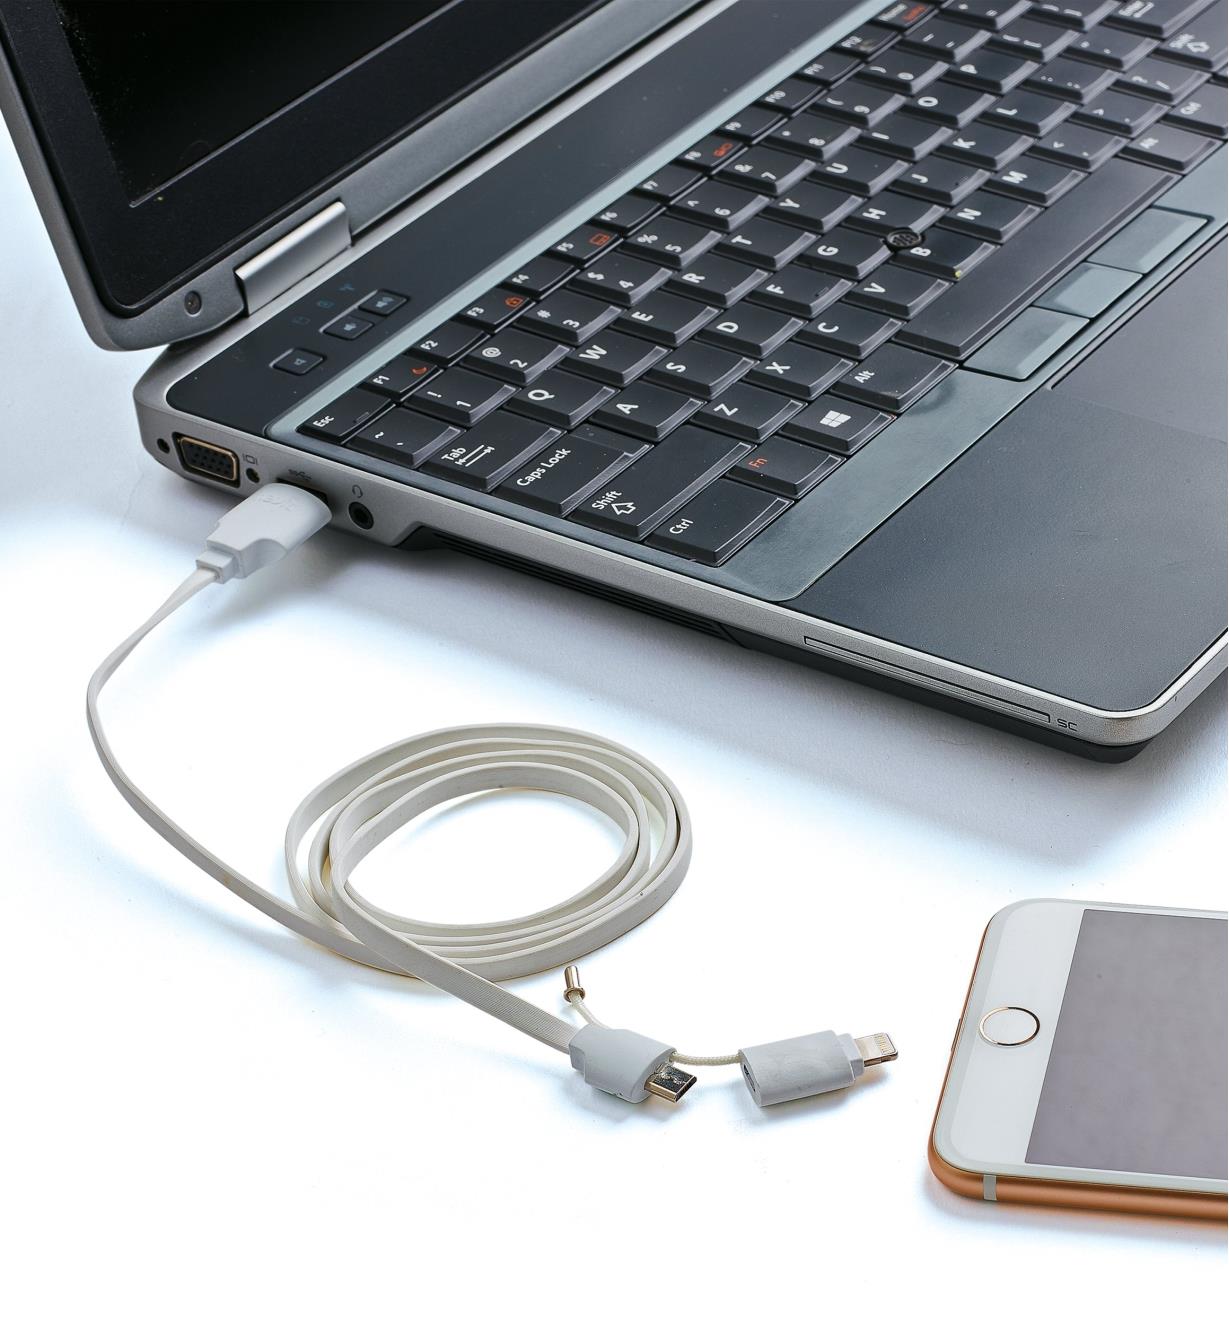 2-in-1 USB Charging Cable connected to a laptop